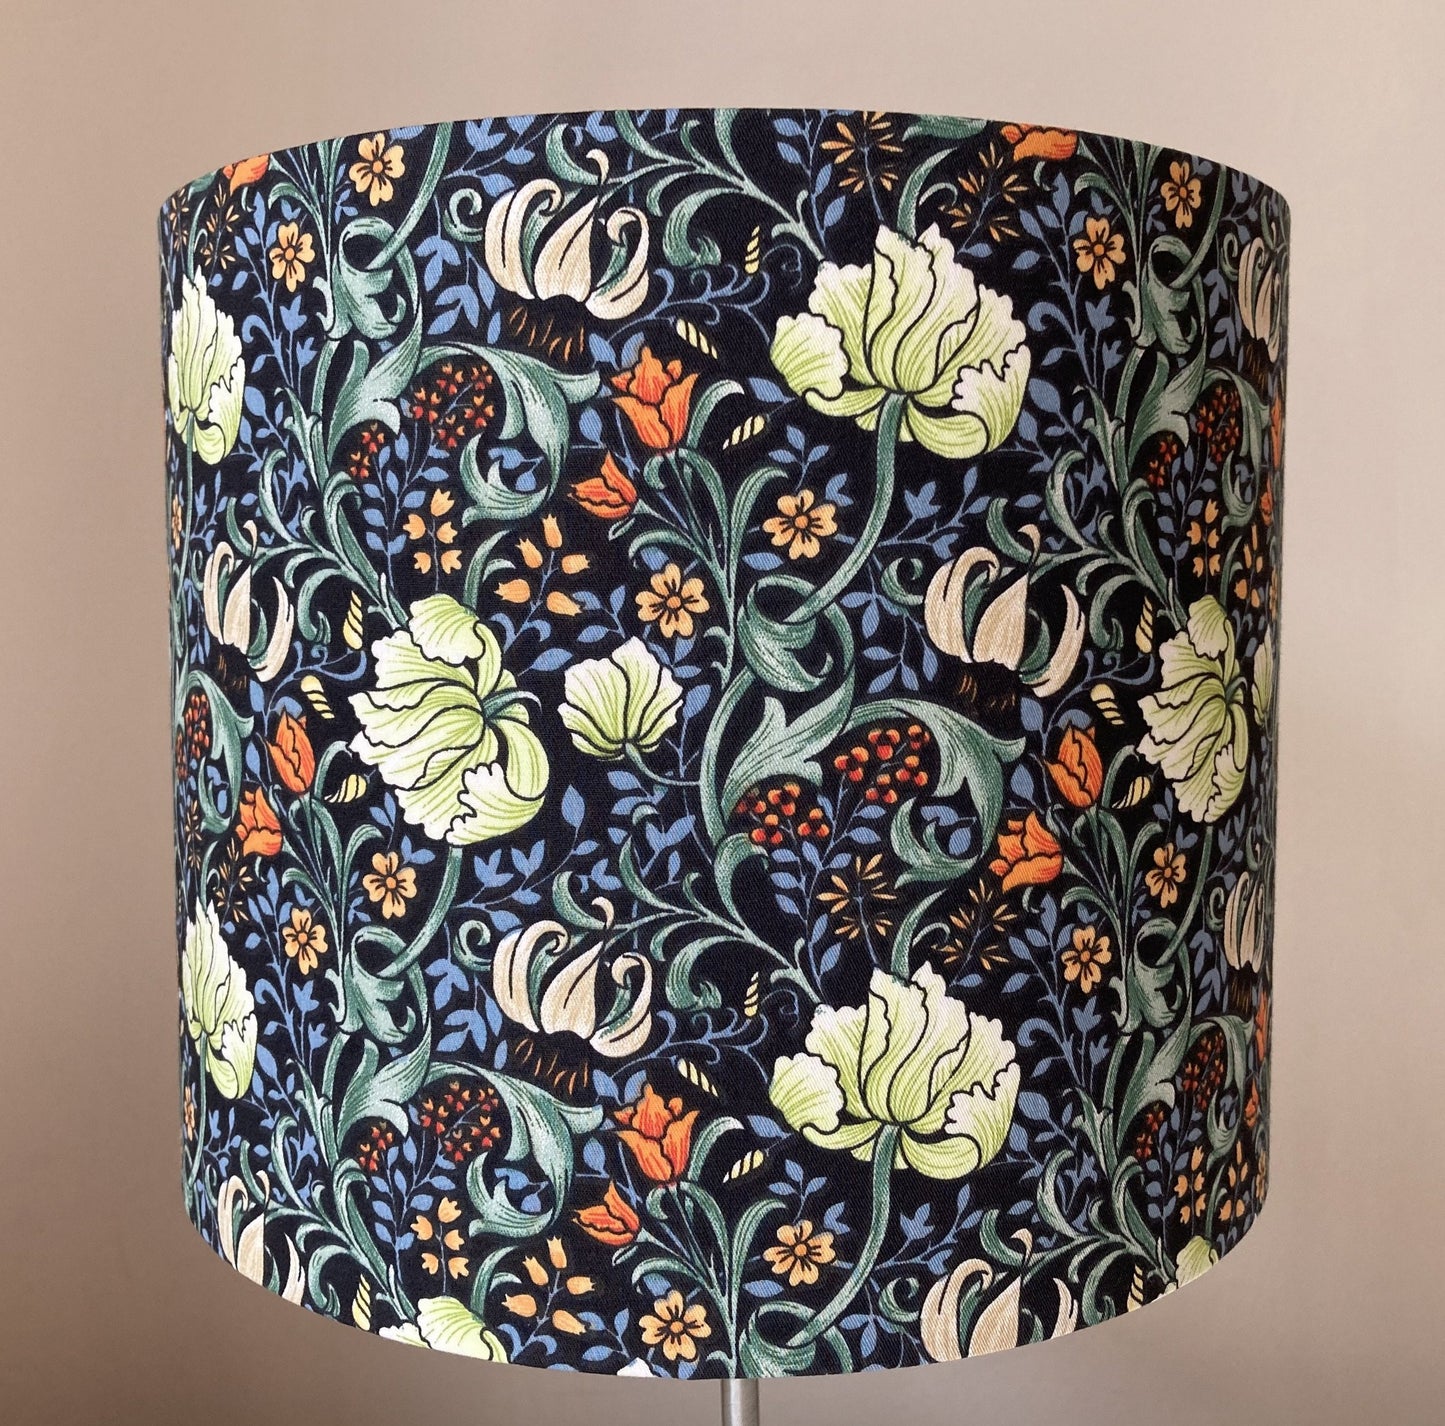 Dark Floral Lampshade William Morris Golden Lily Style for Table Lamps or Ceiling Lights